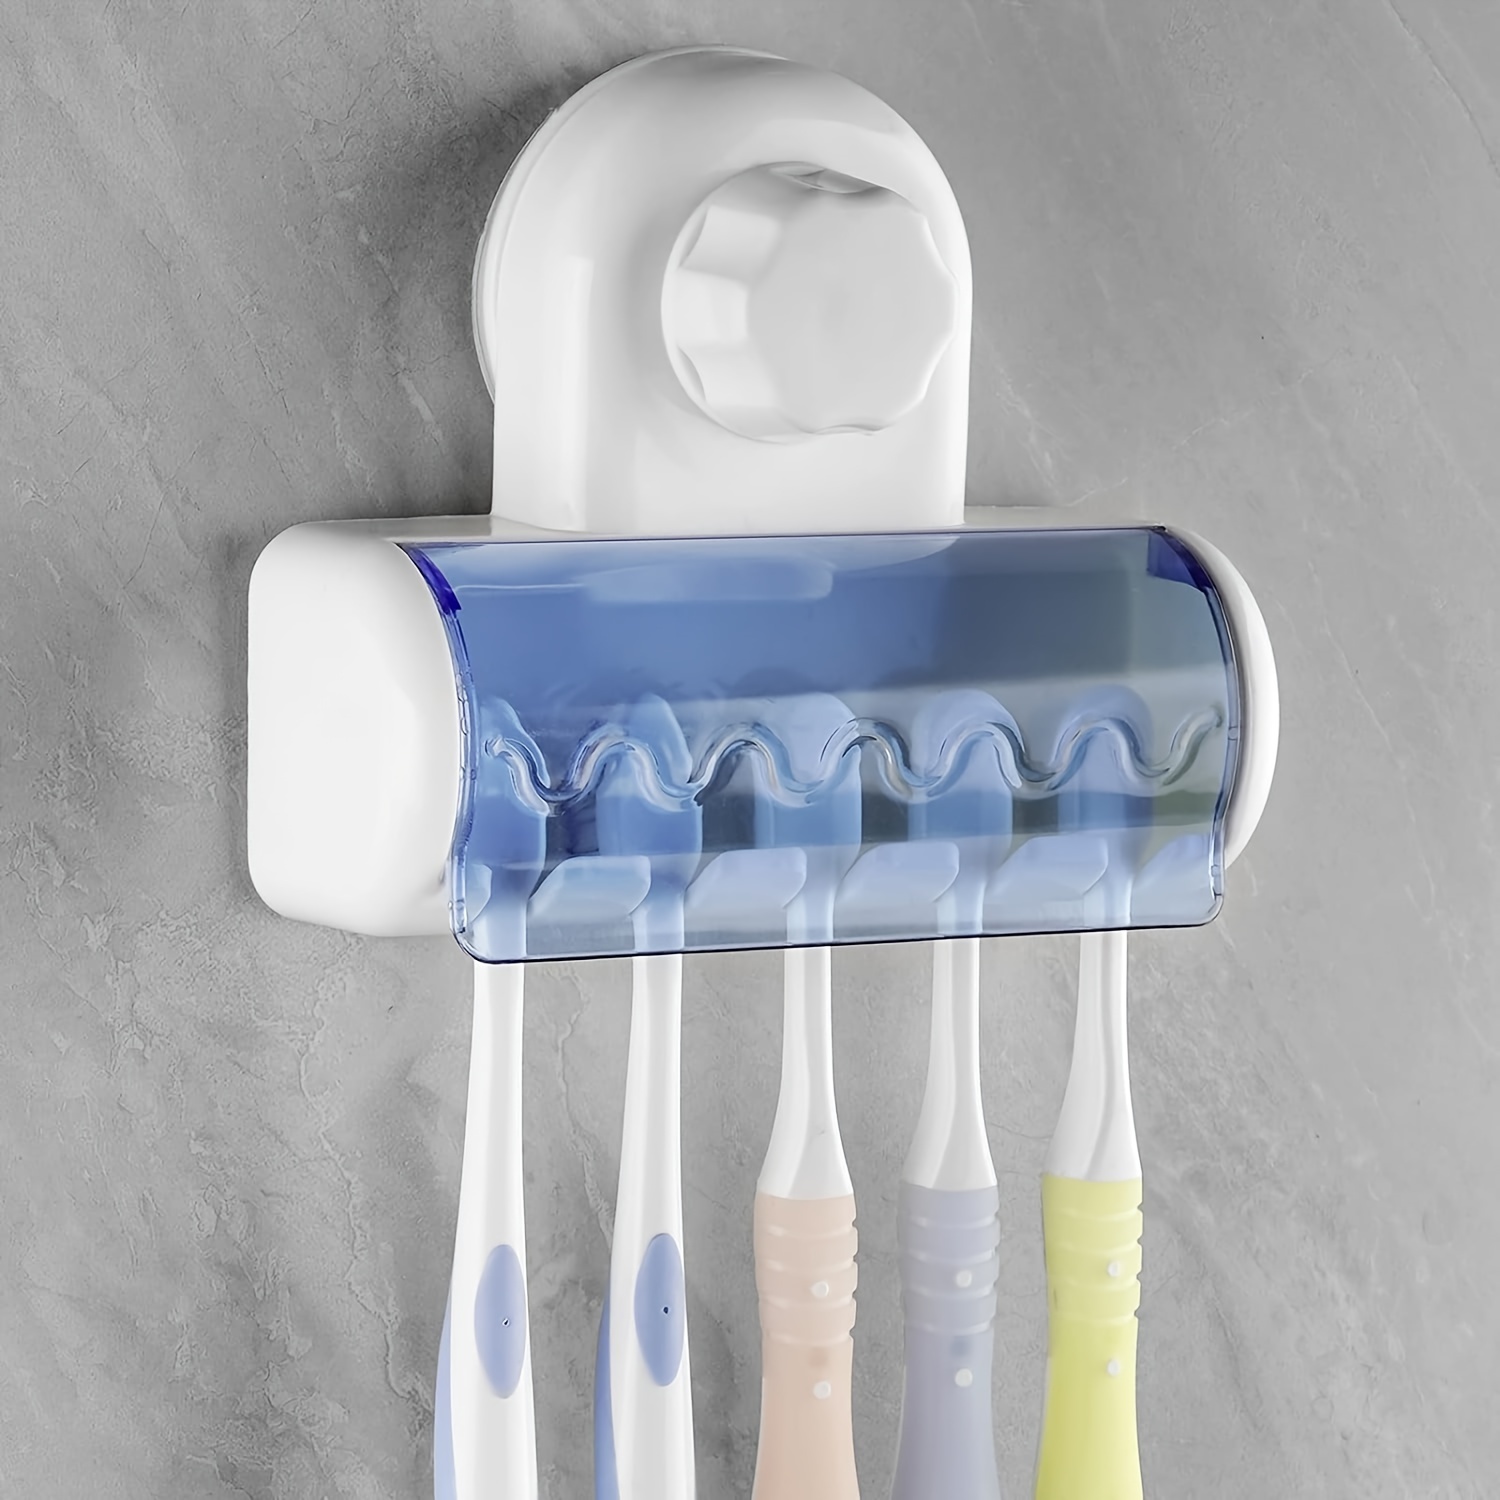 

1pc Wall-mounted Toothbrush Holder With Cover, Self-adhesive Bathroom Organizer, 5 Slots Toothbrush Holder For Shower, Dorm